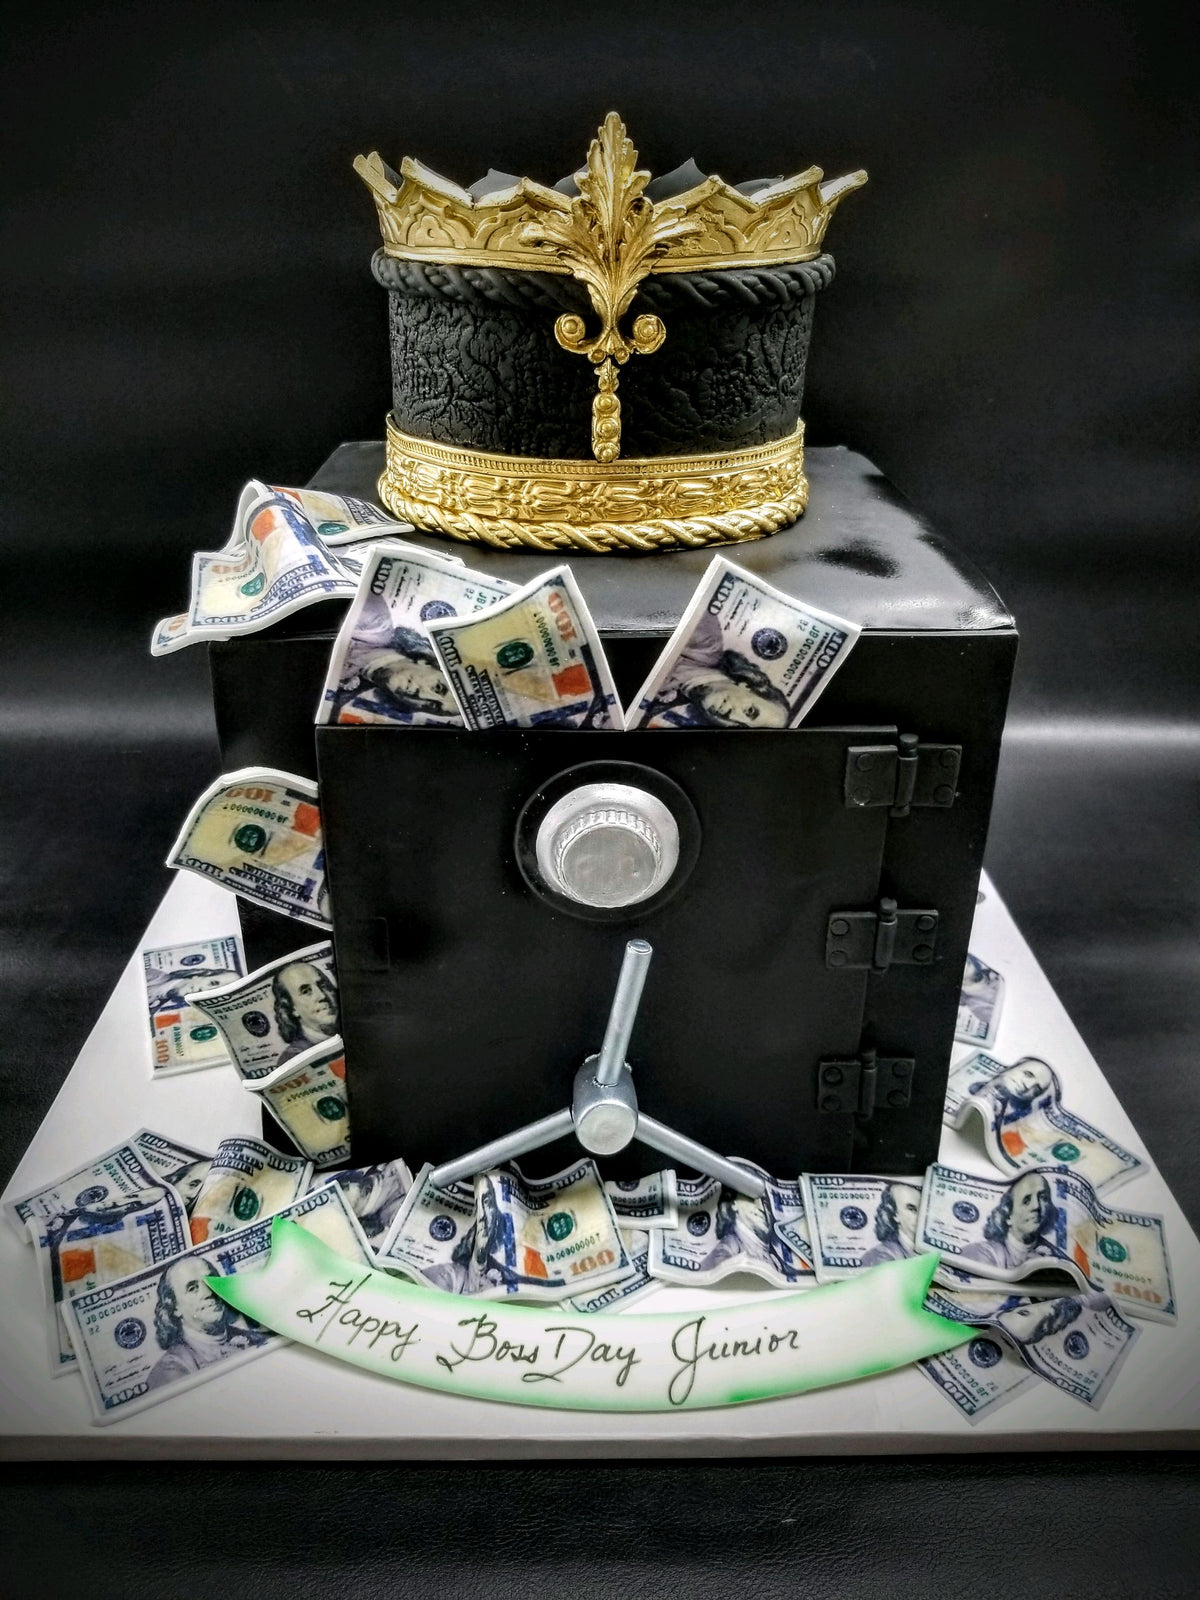 Money Safe cake with King's crown CS0289